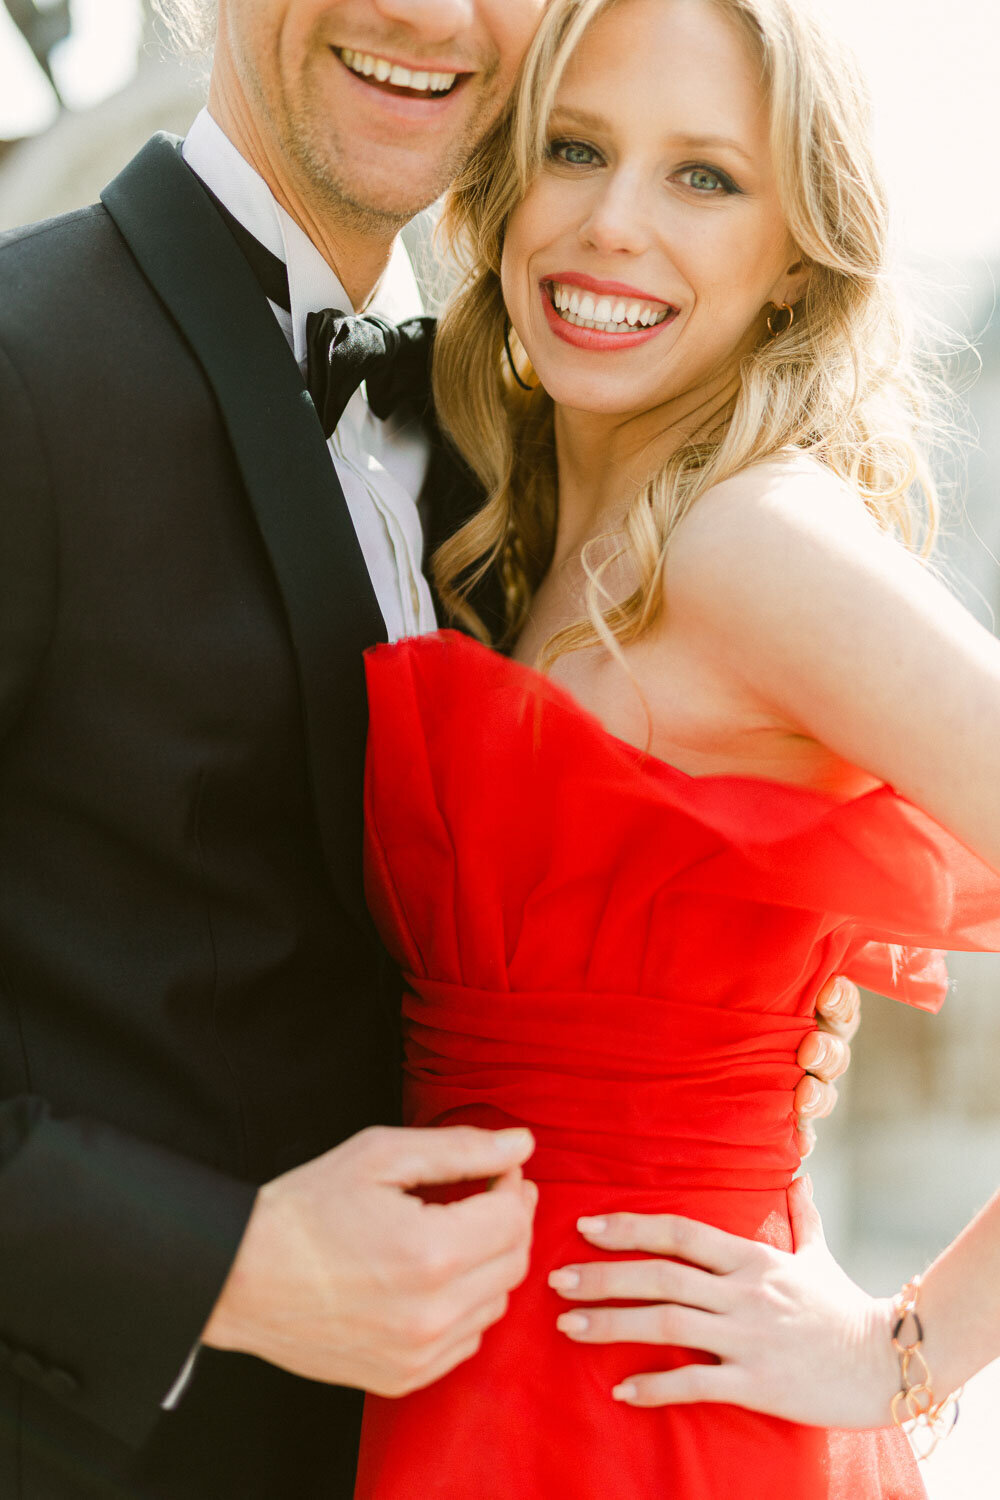 Smiling couple during their engagement shooting